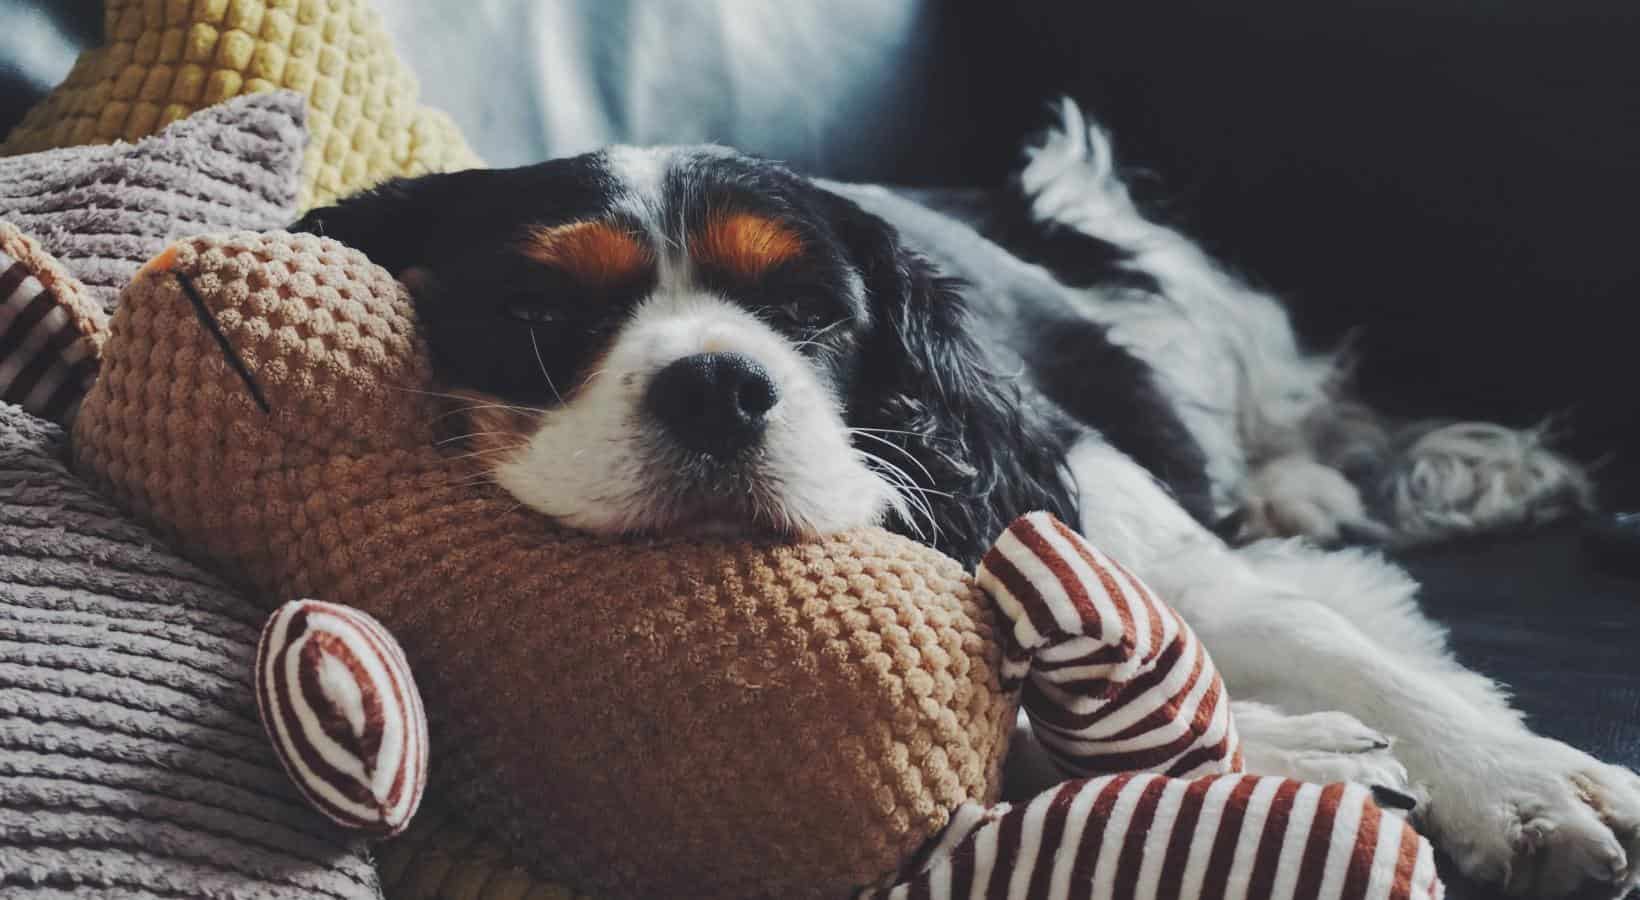 Cute dog resting on pillows and a stuffed dog toy in a pet-friendly apartment